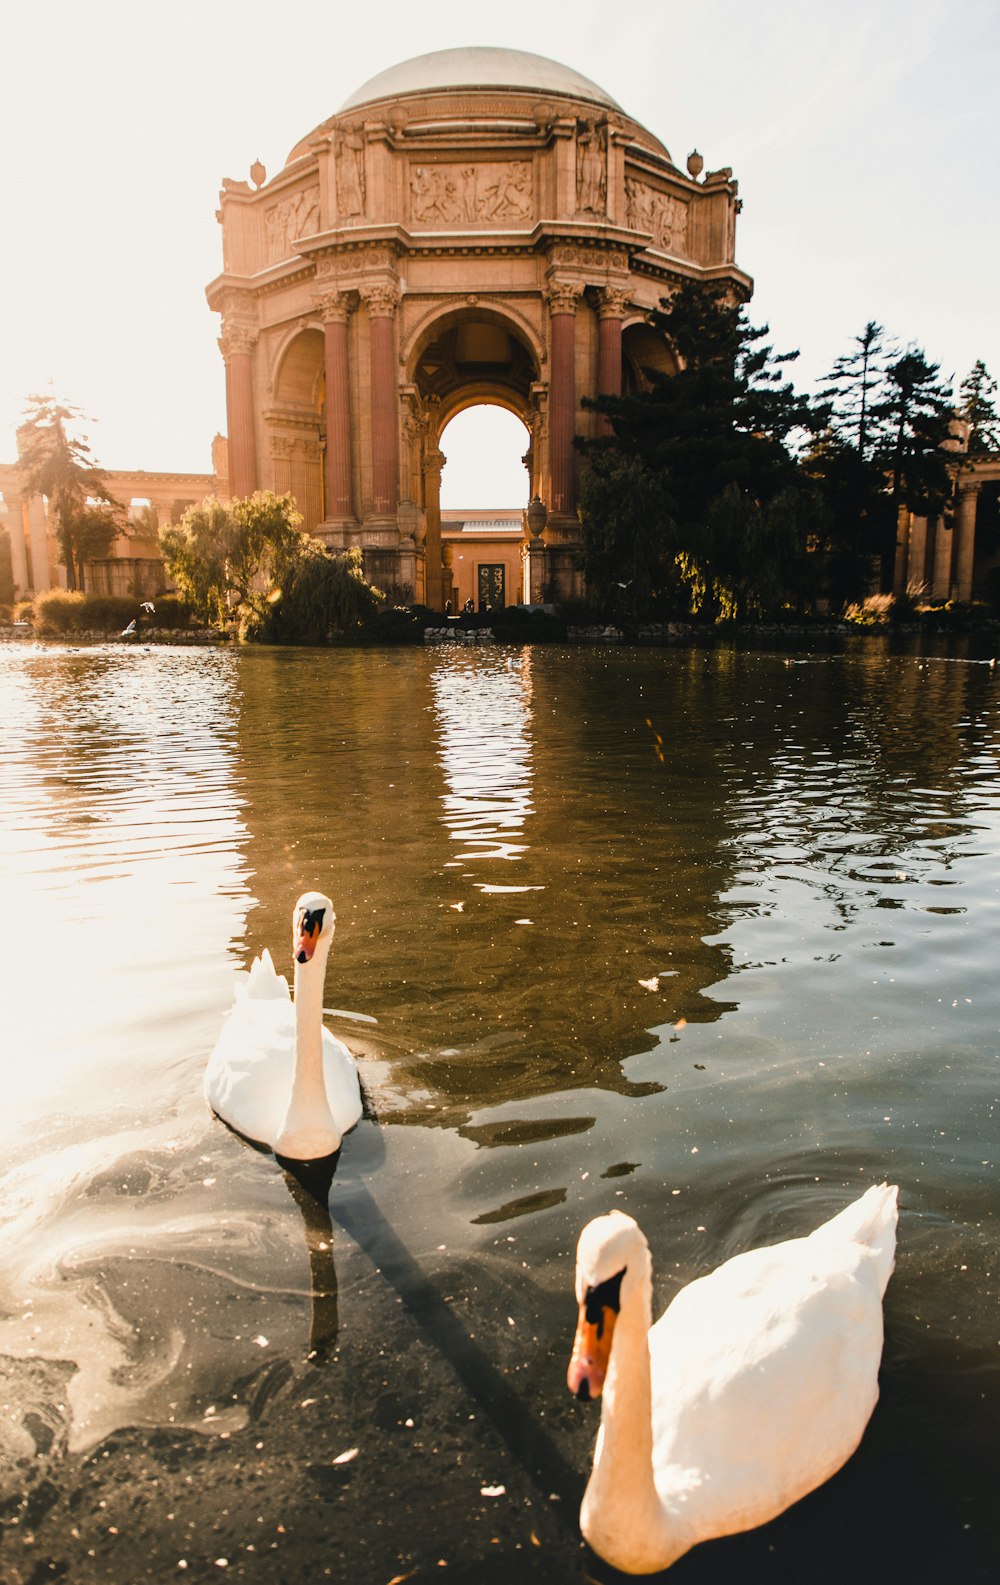 two white swans on body of water